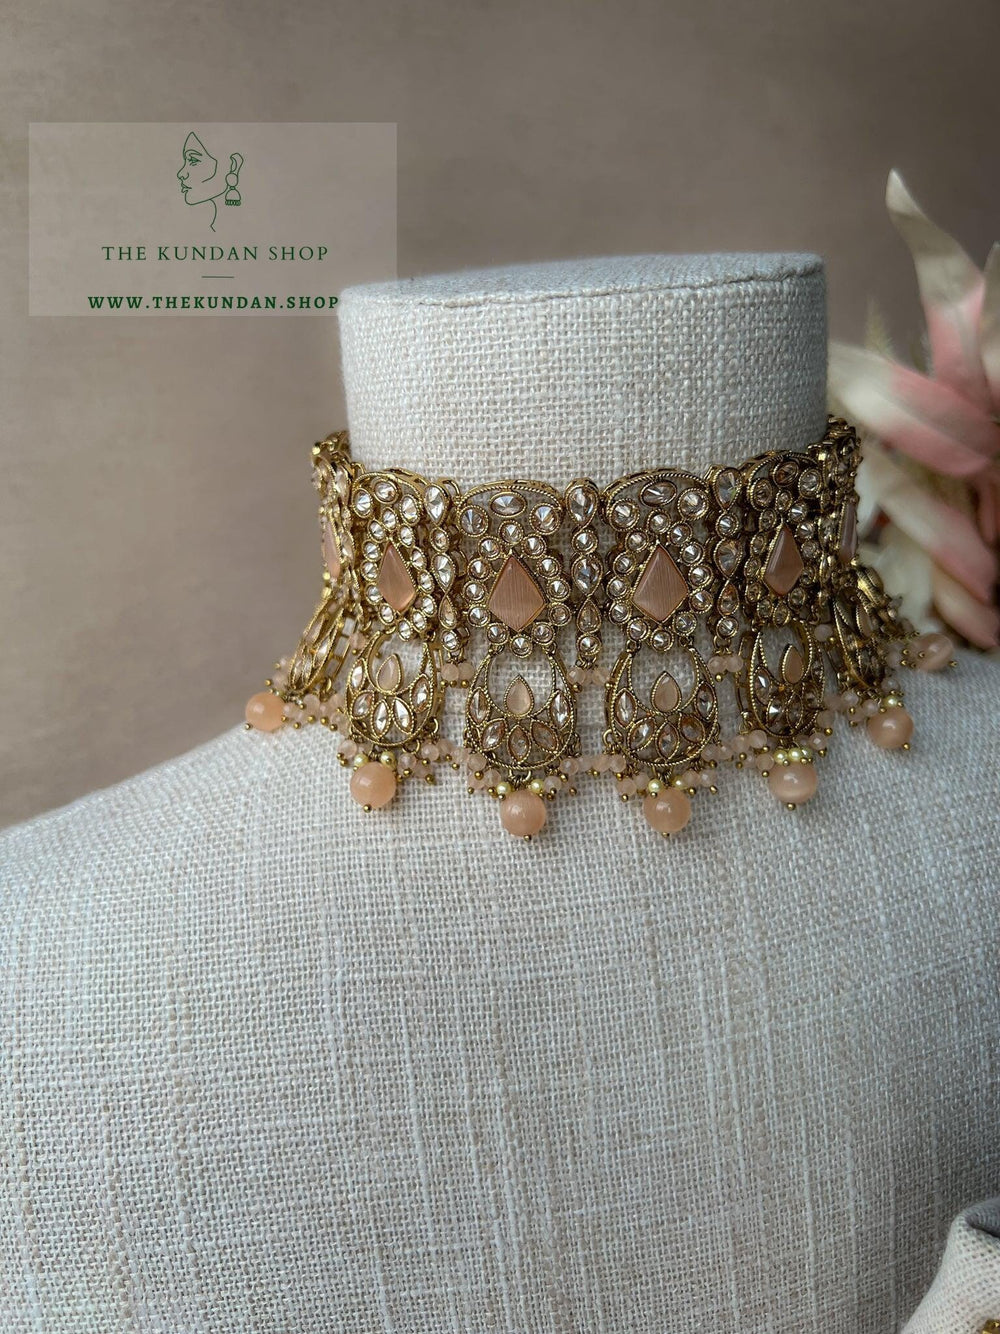 Promising Polki in Peach Necklace Sets THE KUNDAN SHOP 